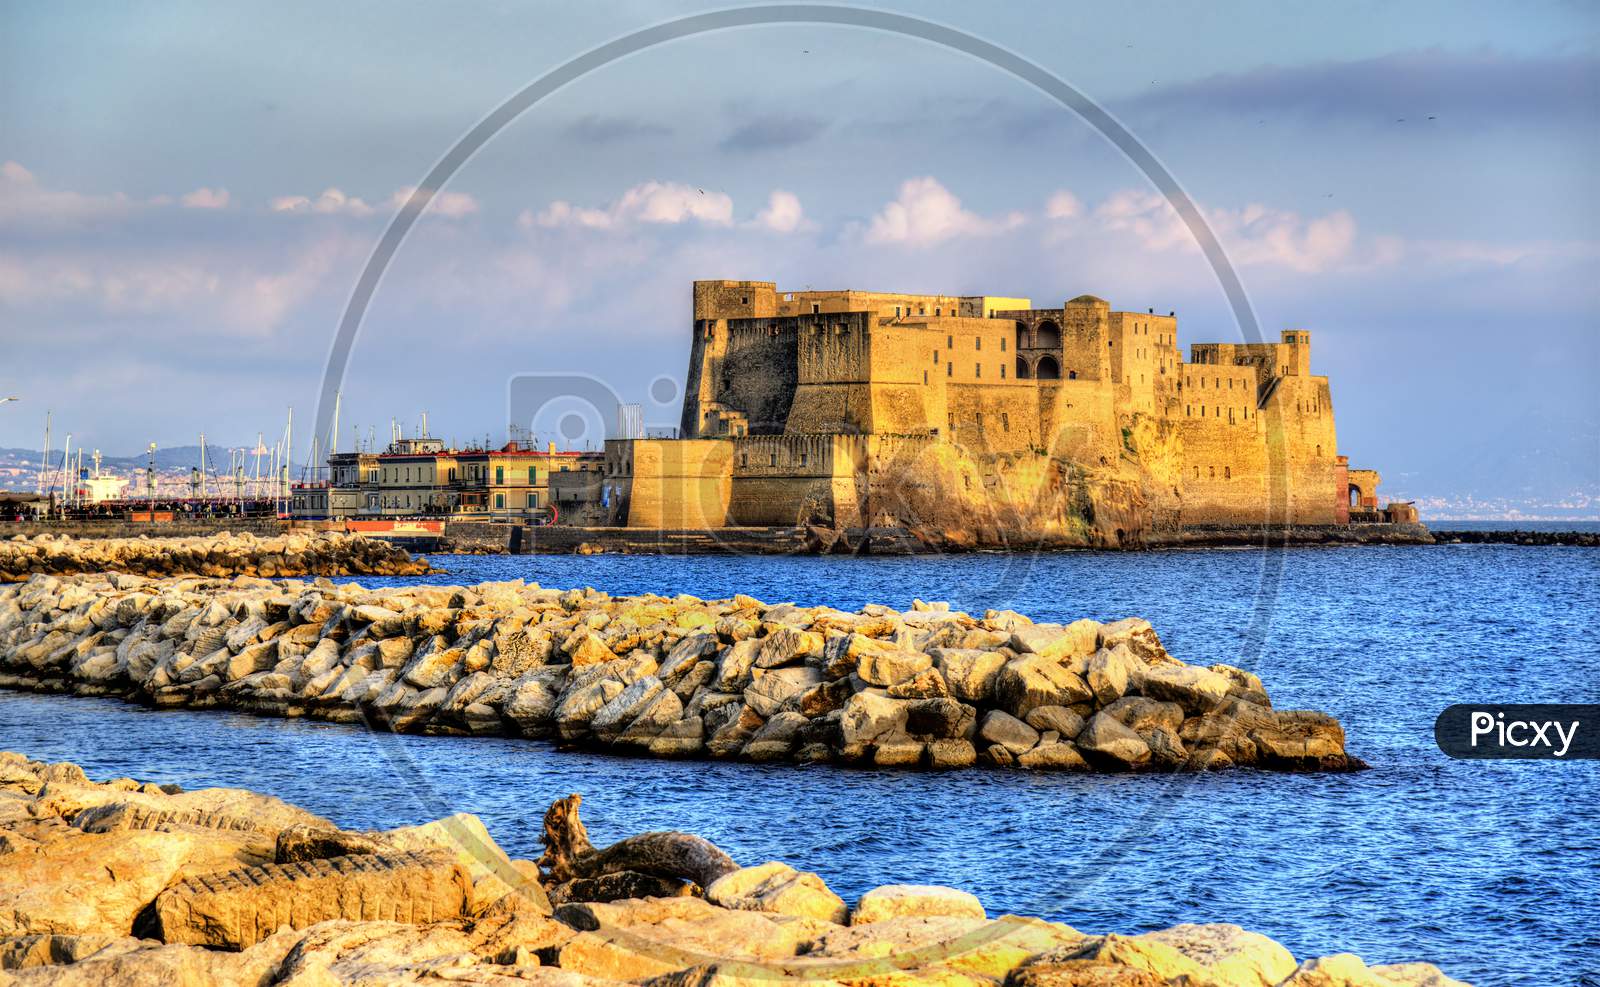 Castel Dell'Ovo, A Medieval Fortress In The Bay Of Naples